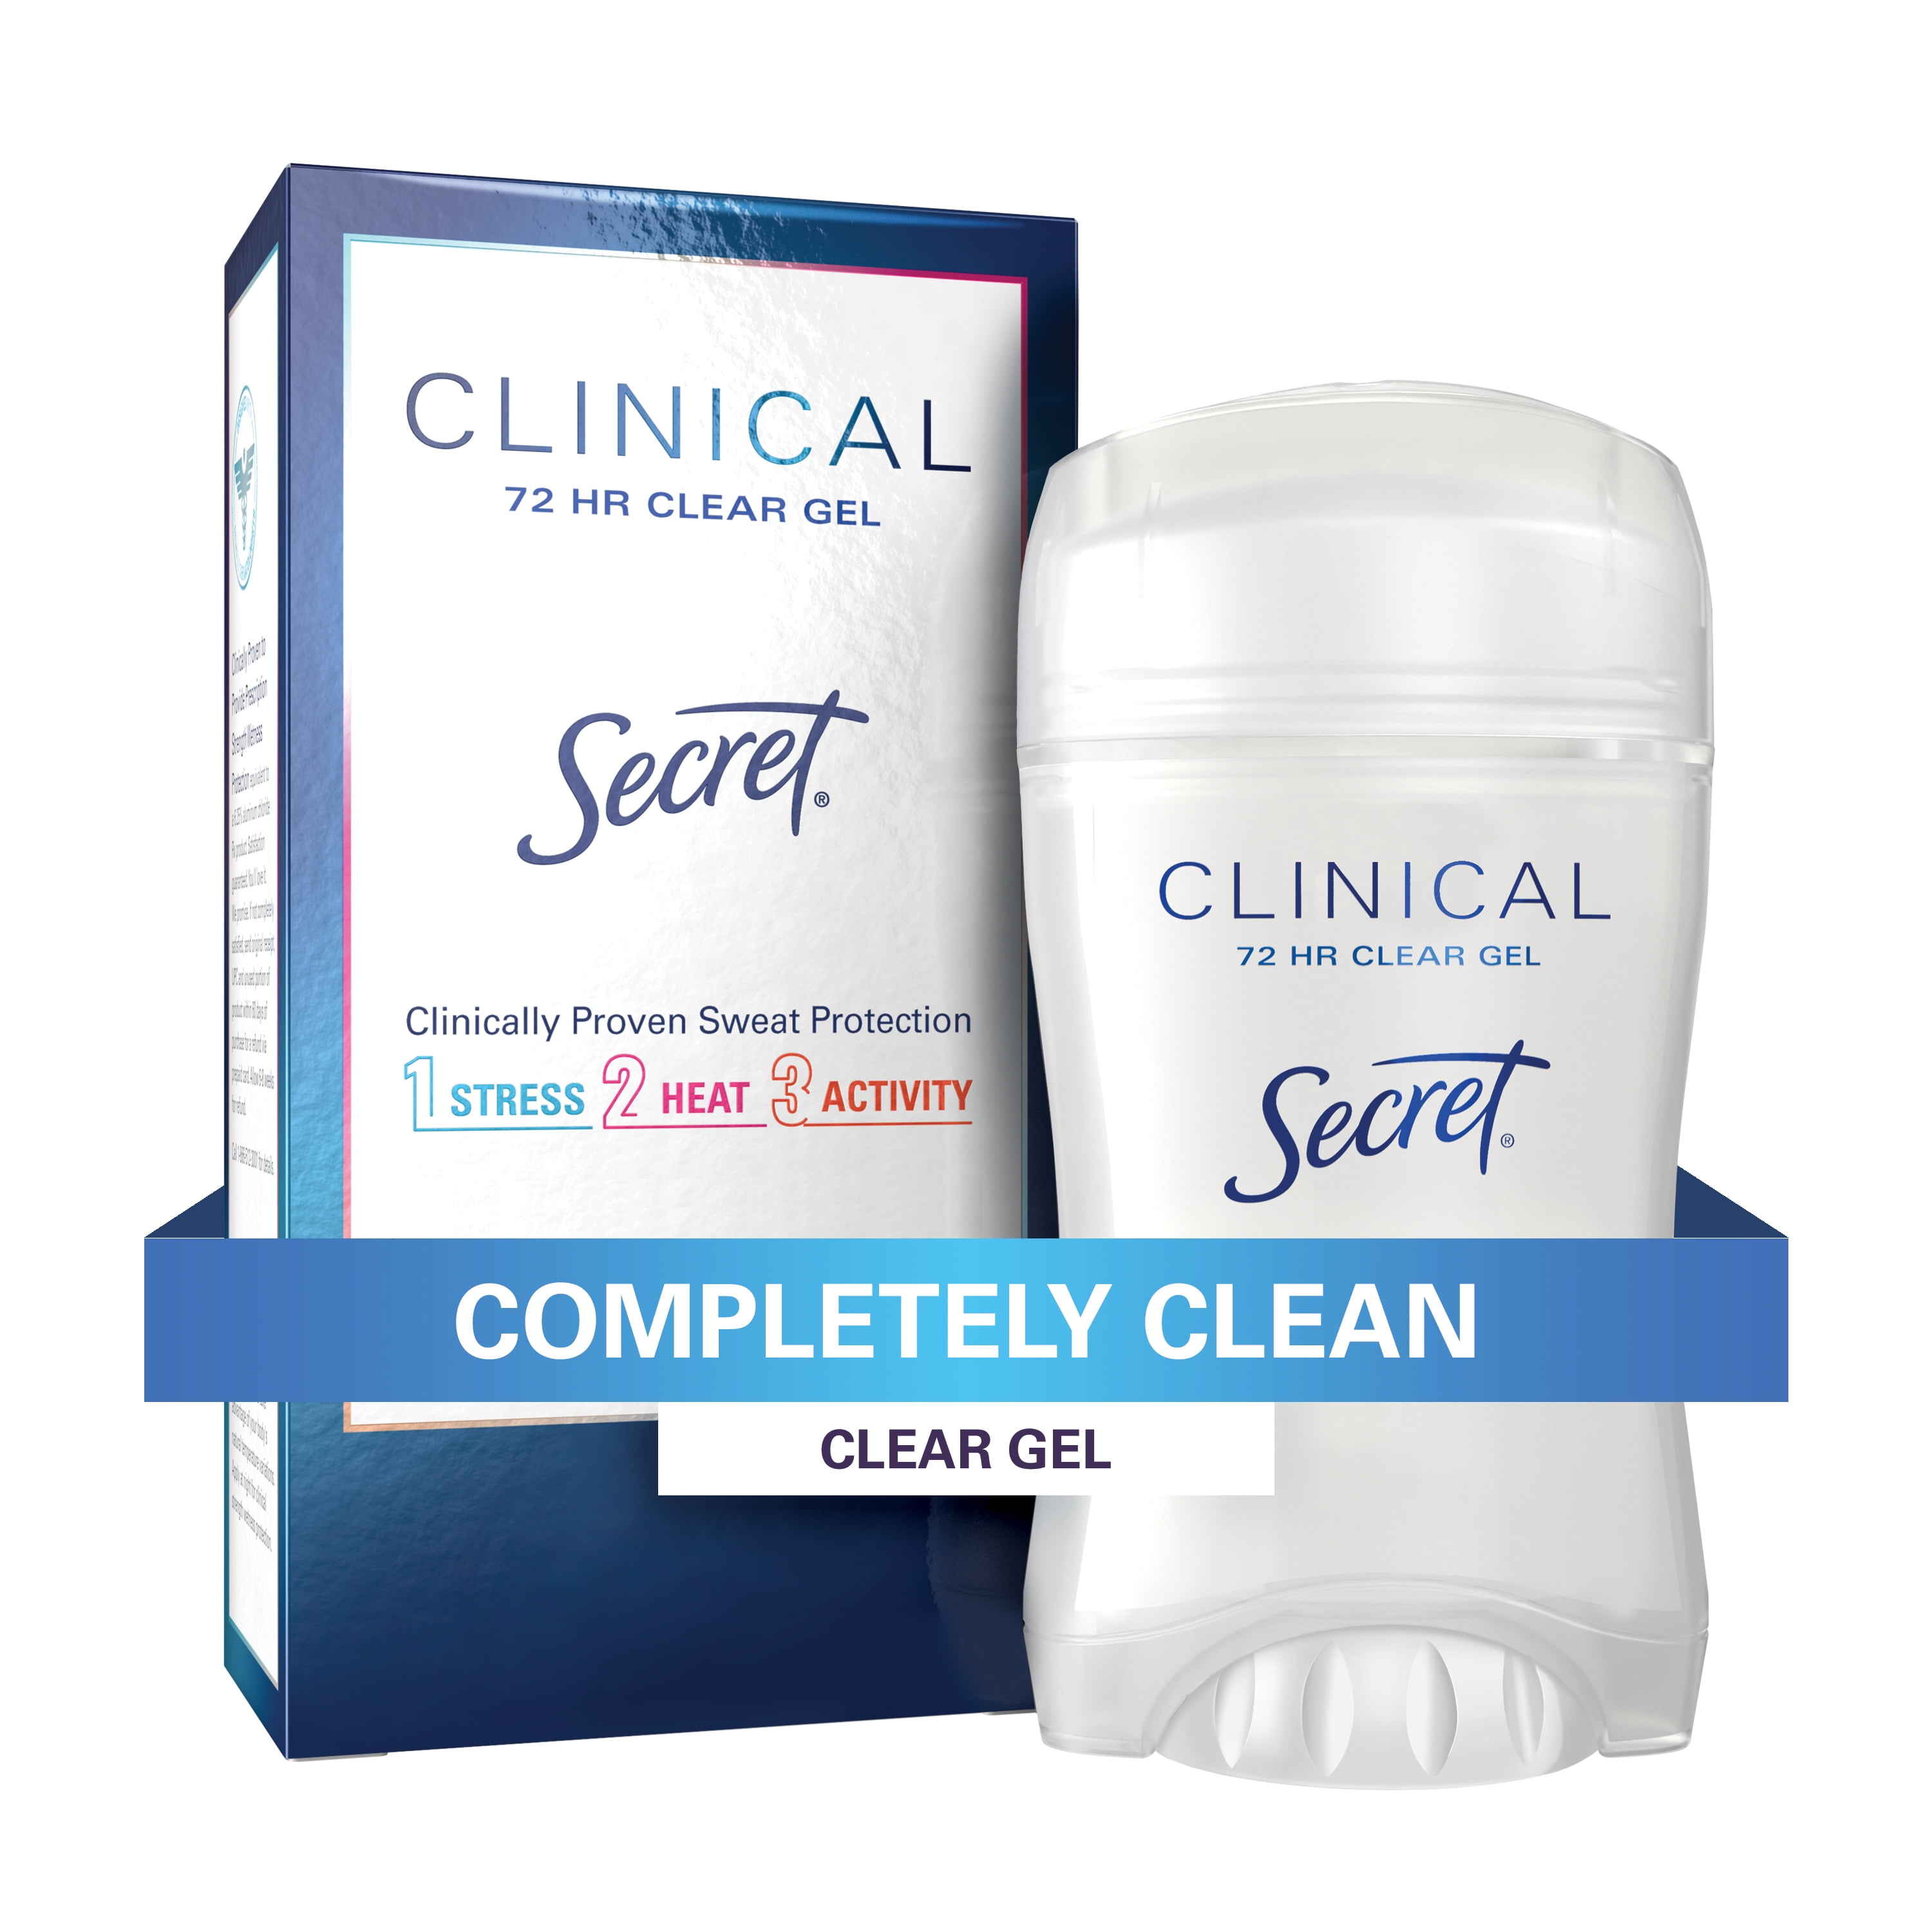 Secret Clinical Strength Clear Gel and Deodorant, Completely Clean, 1.6 oz - Walmart.com